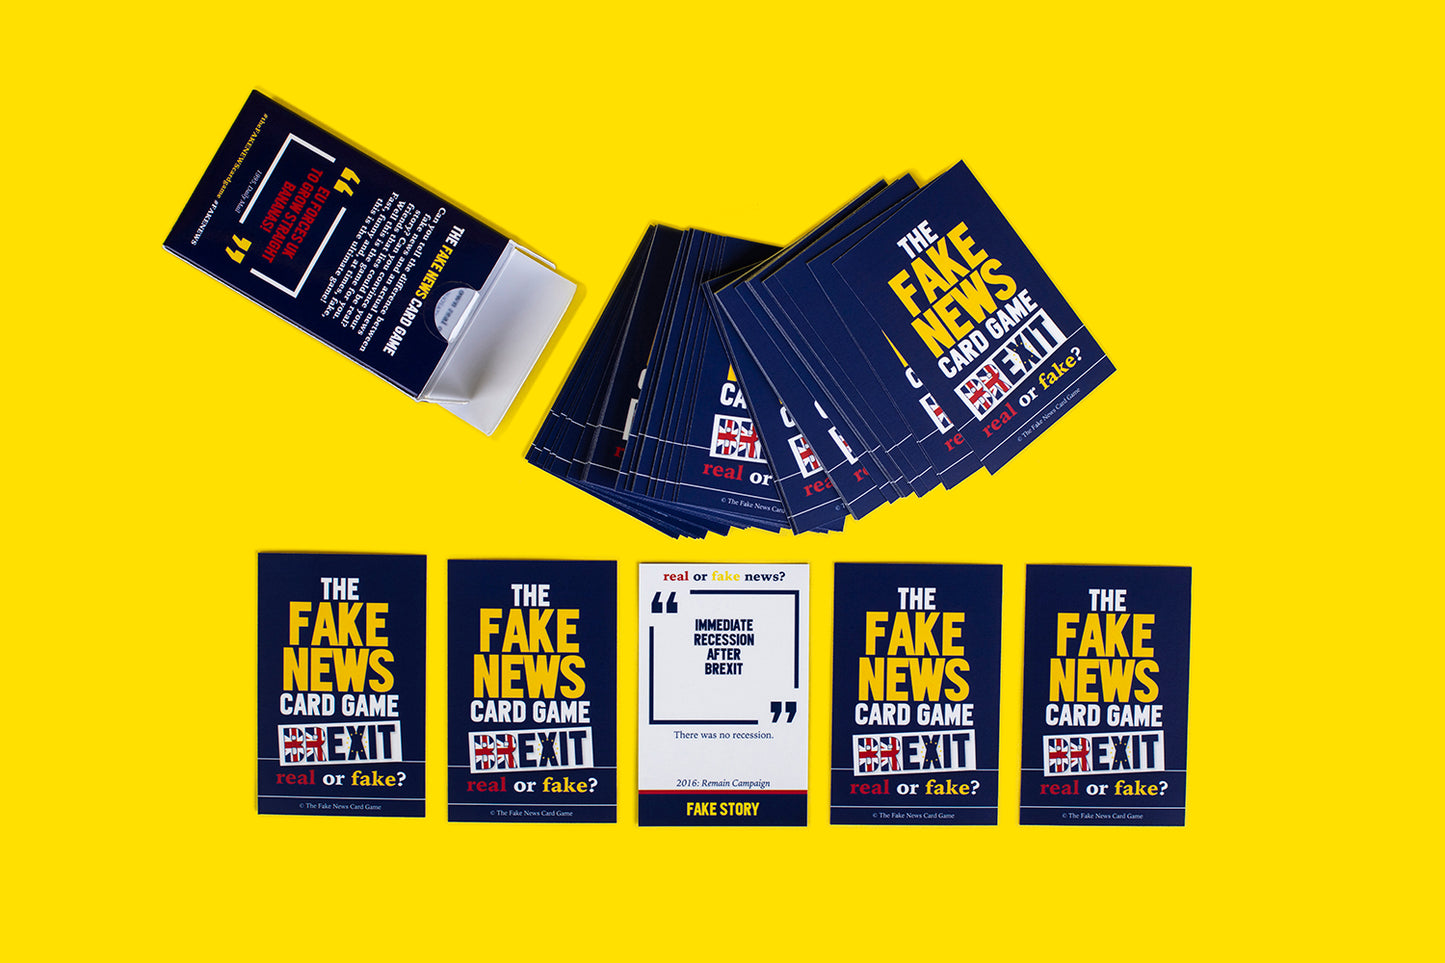 Brexit Edition: Fake News Card Game